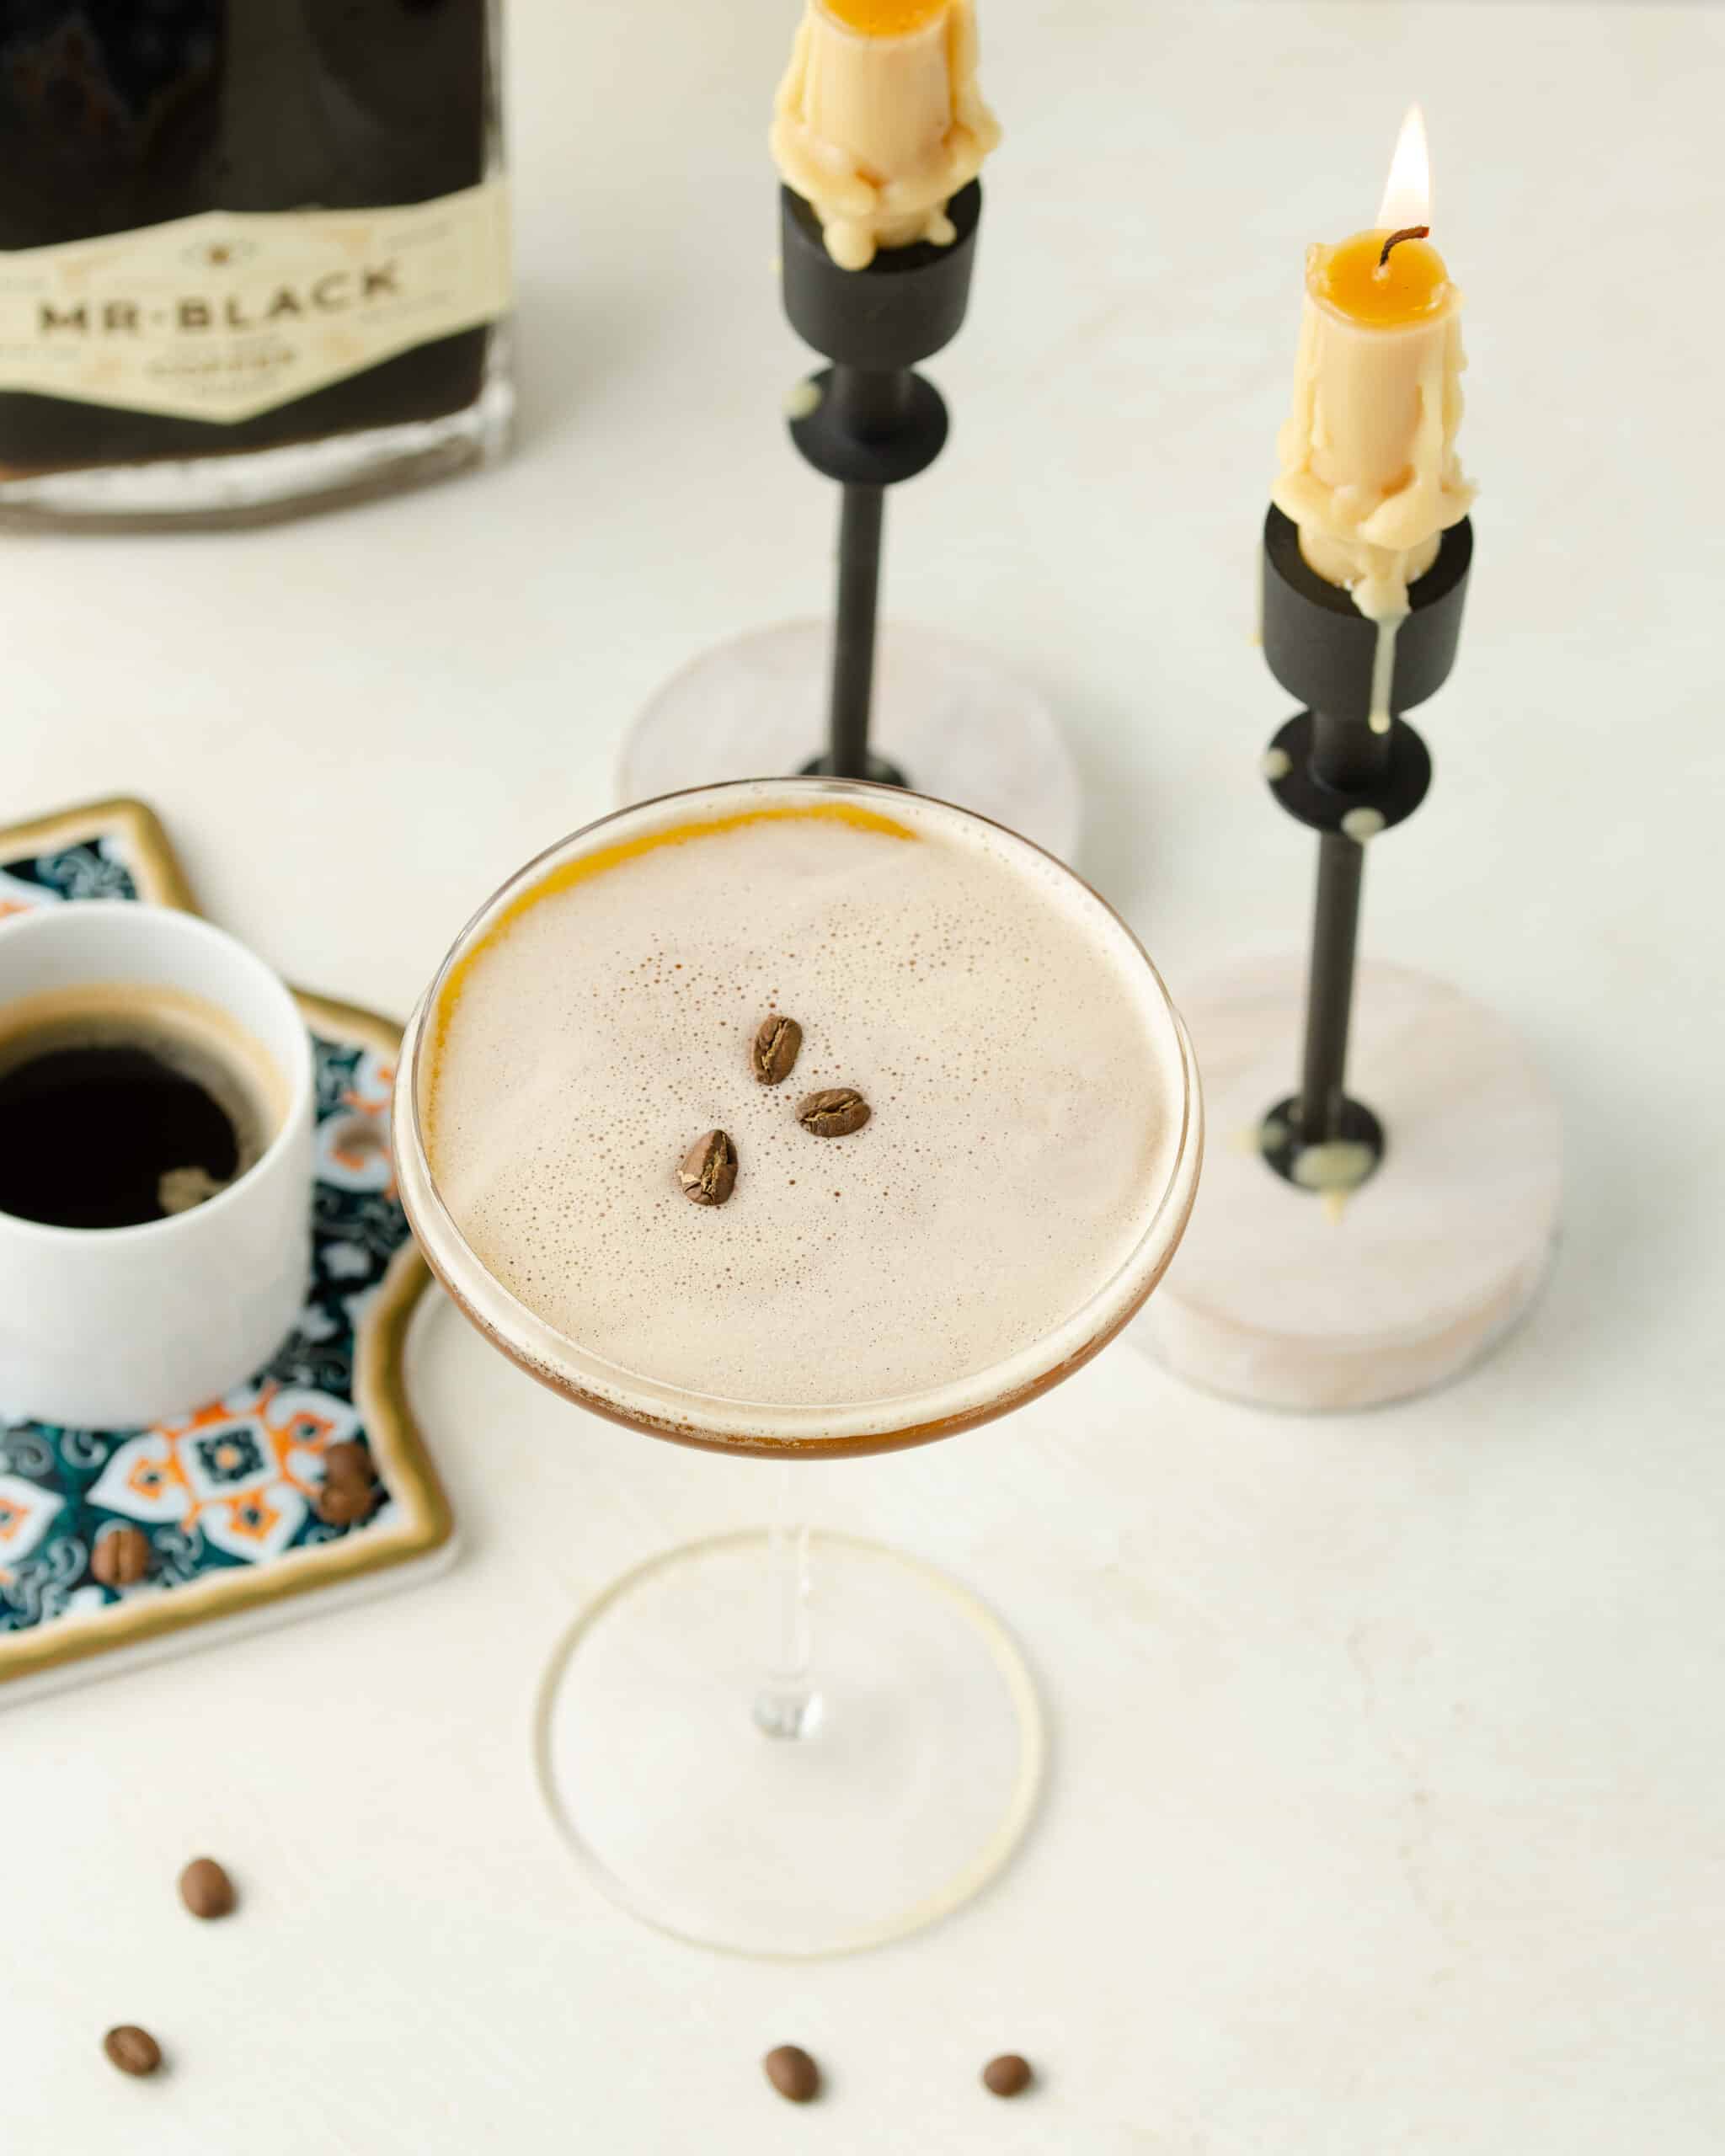 Espresso martini in a glass on the counter with candles burning and cup of espresso.